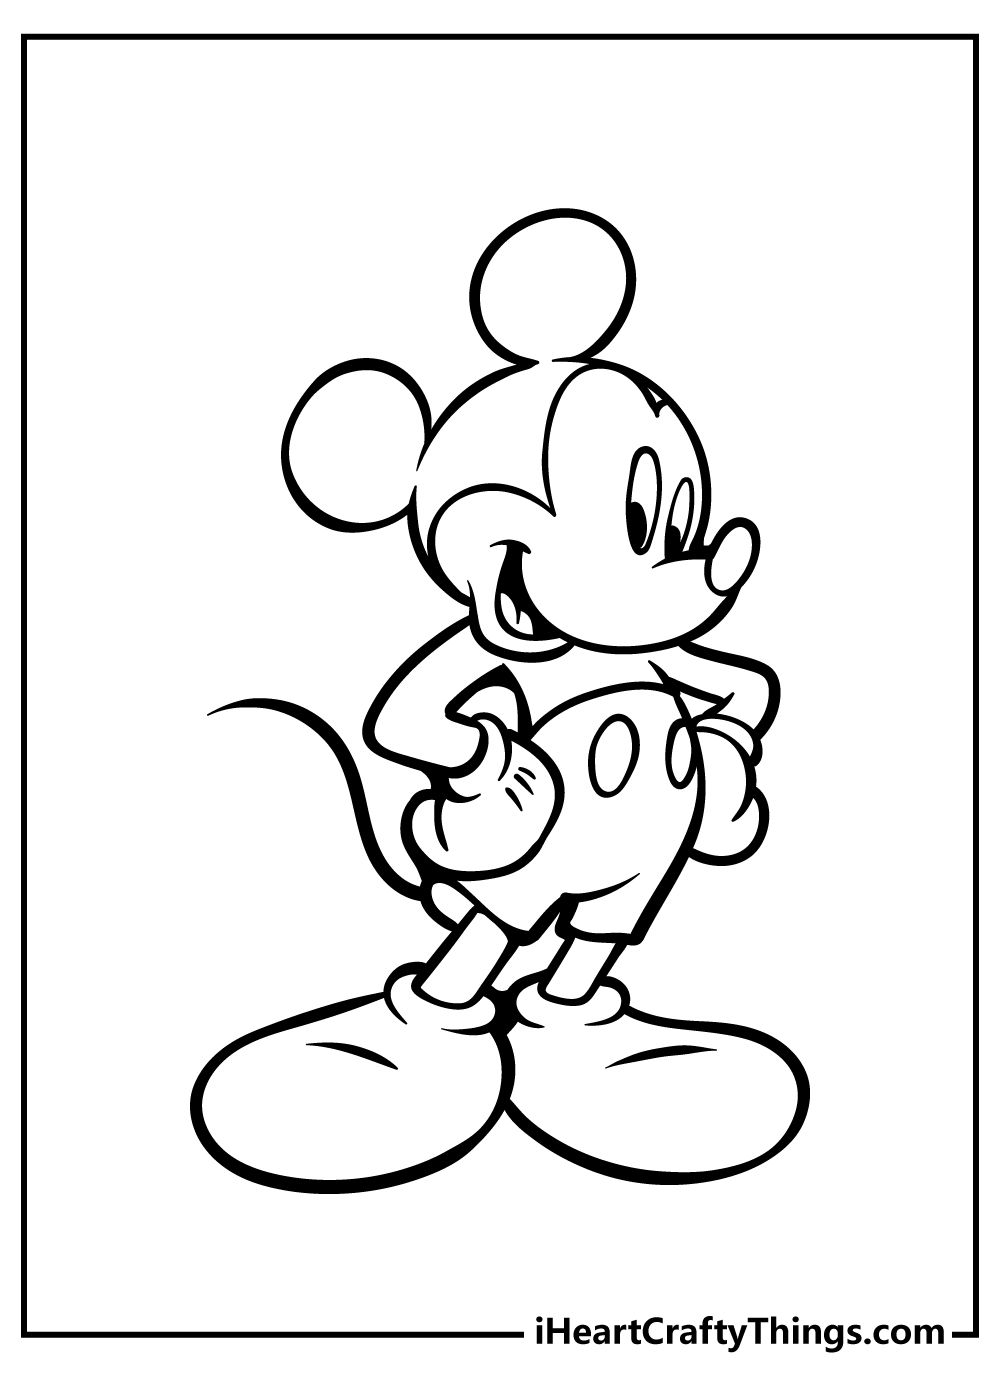 Cool Mickey Mouse Coloring Pages Printables 16